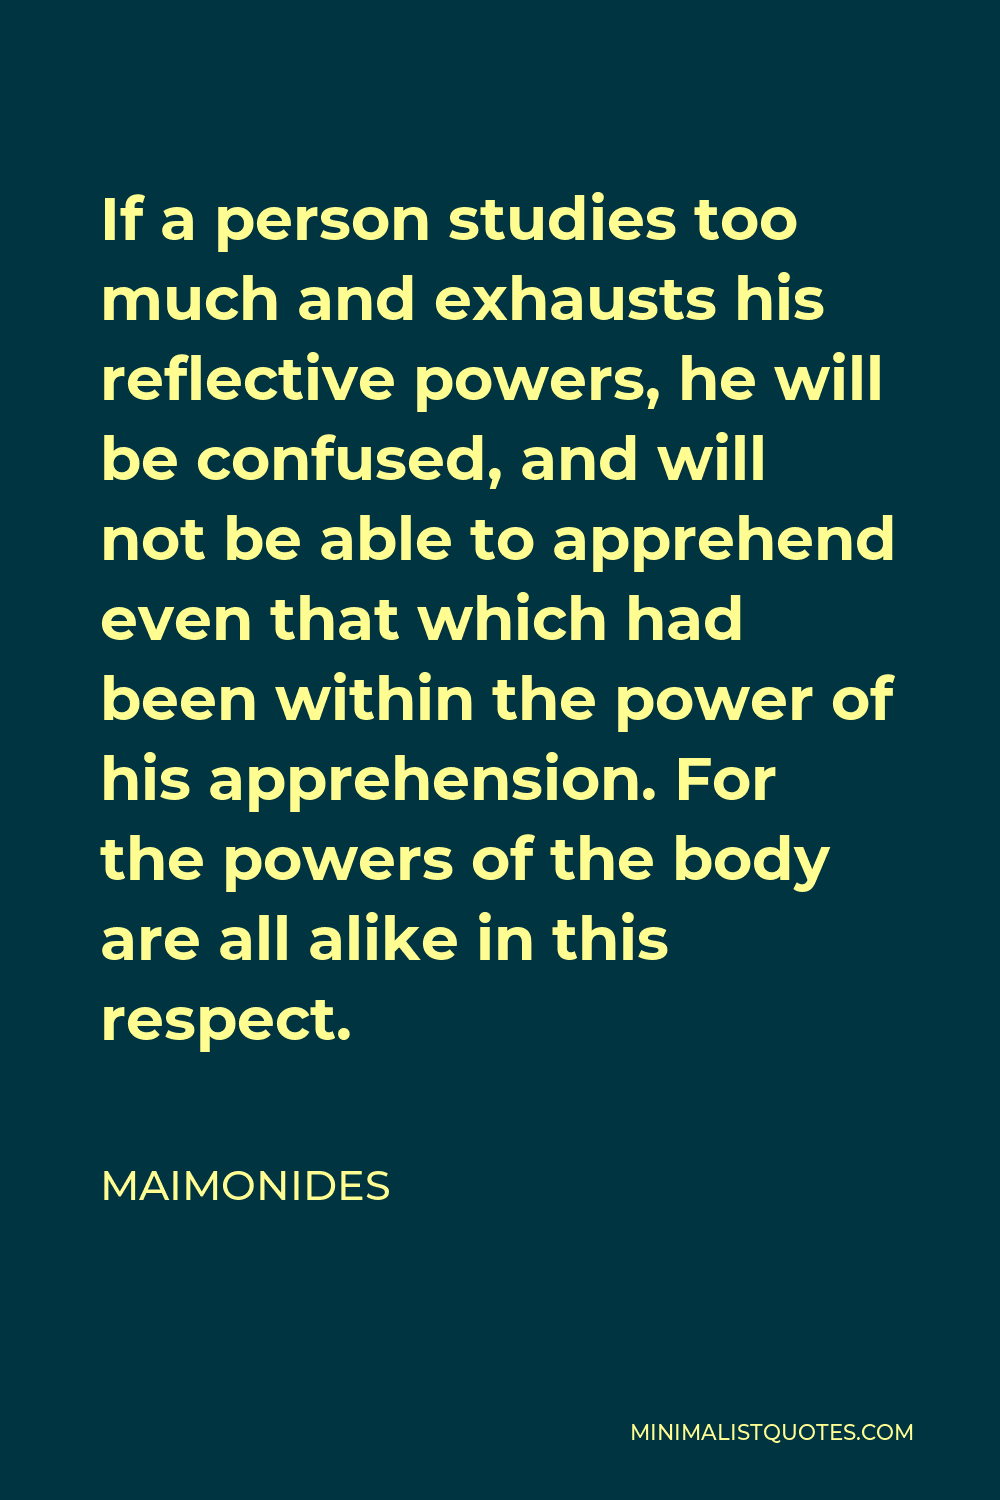 Maimonides Quote - If a person studies too much and exhausts his reflective powers, he will be confused, and will not be able to apprehend even that which had been within the power of his apprehension. For the powers of the body are all alike in this respect.